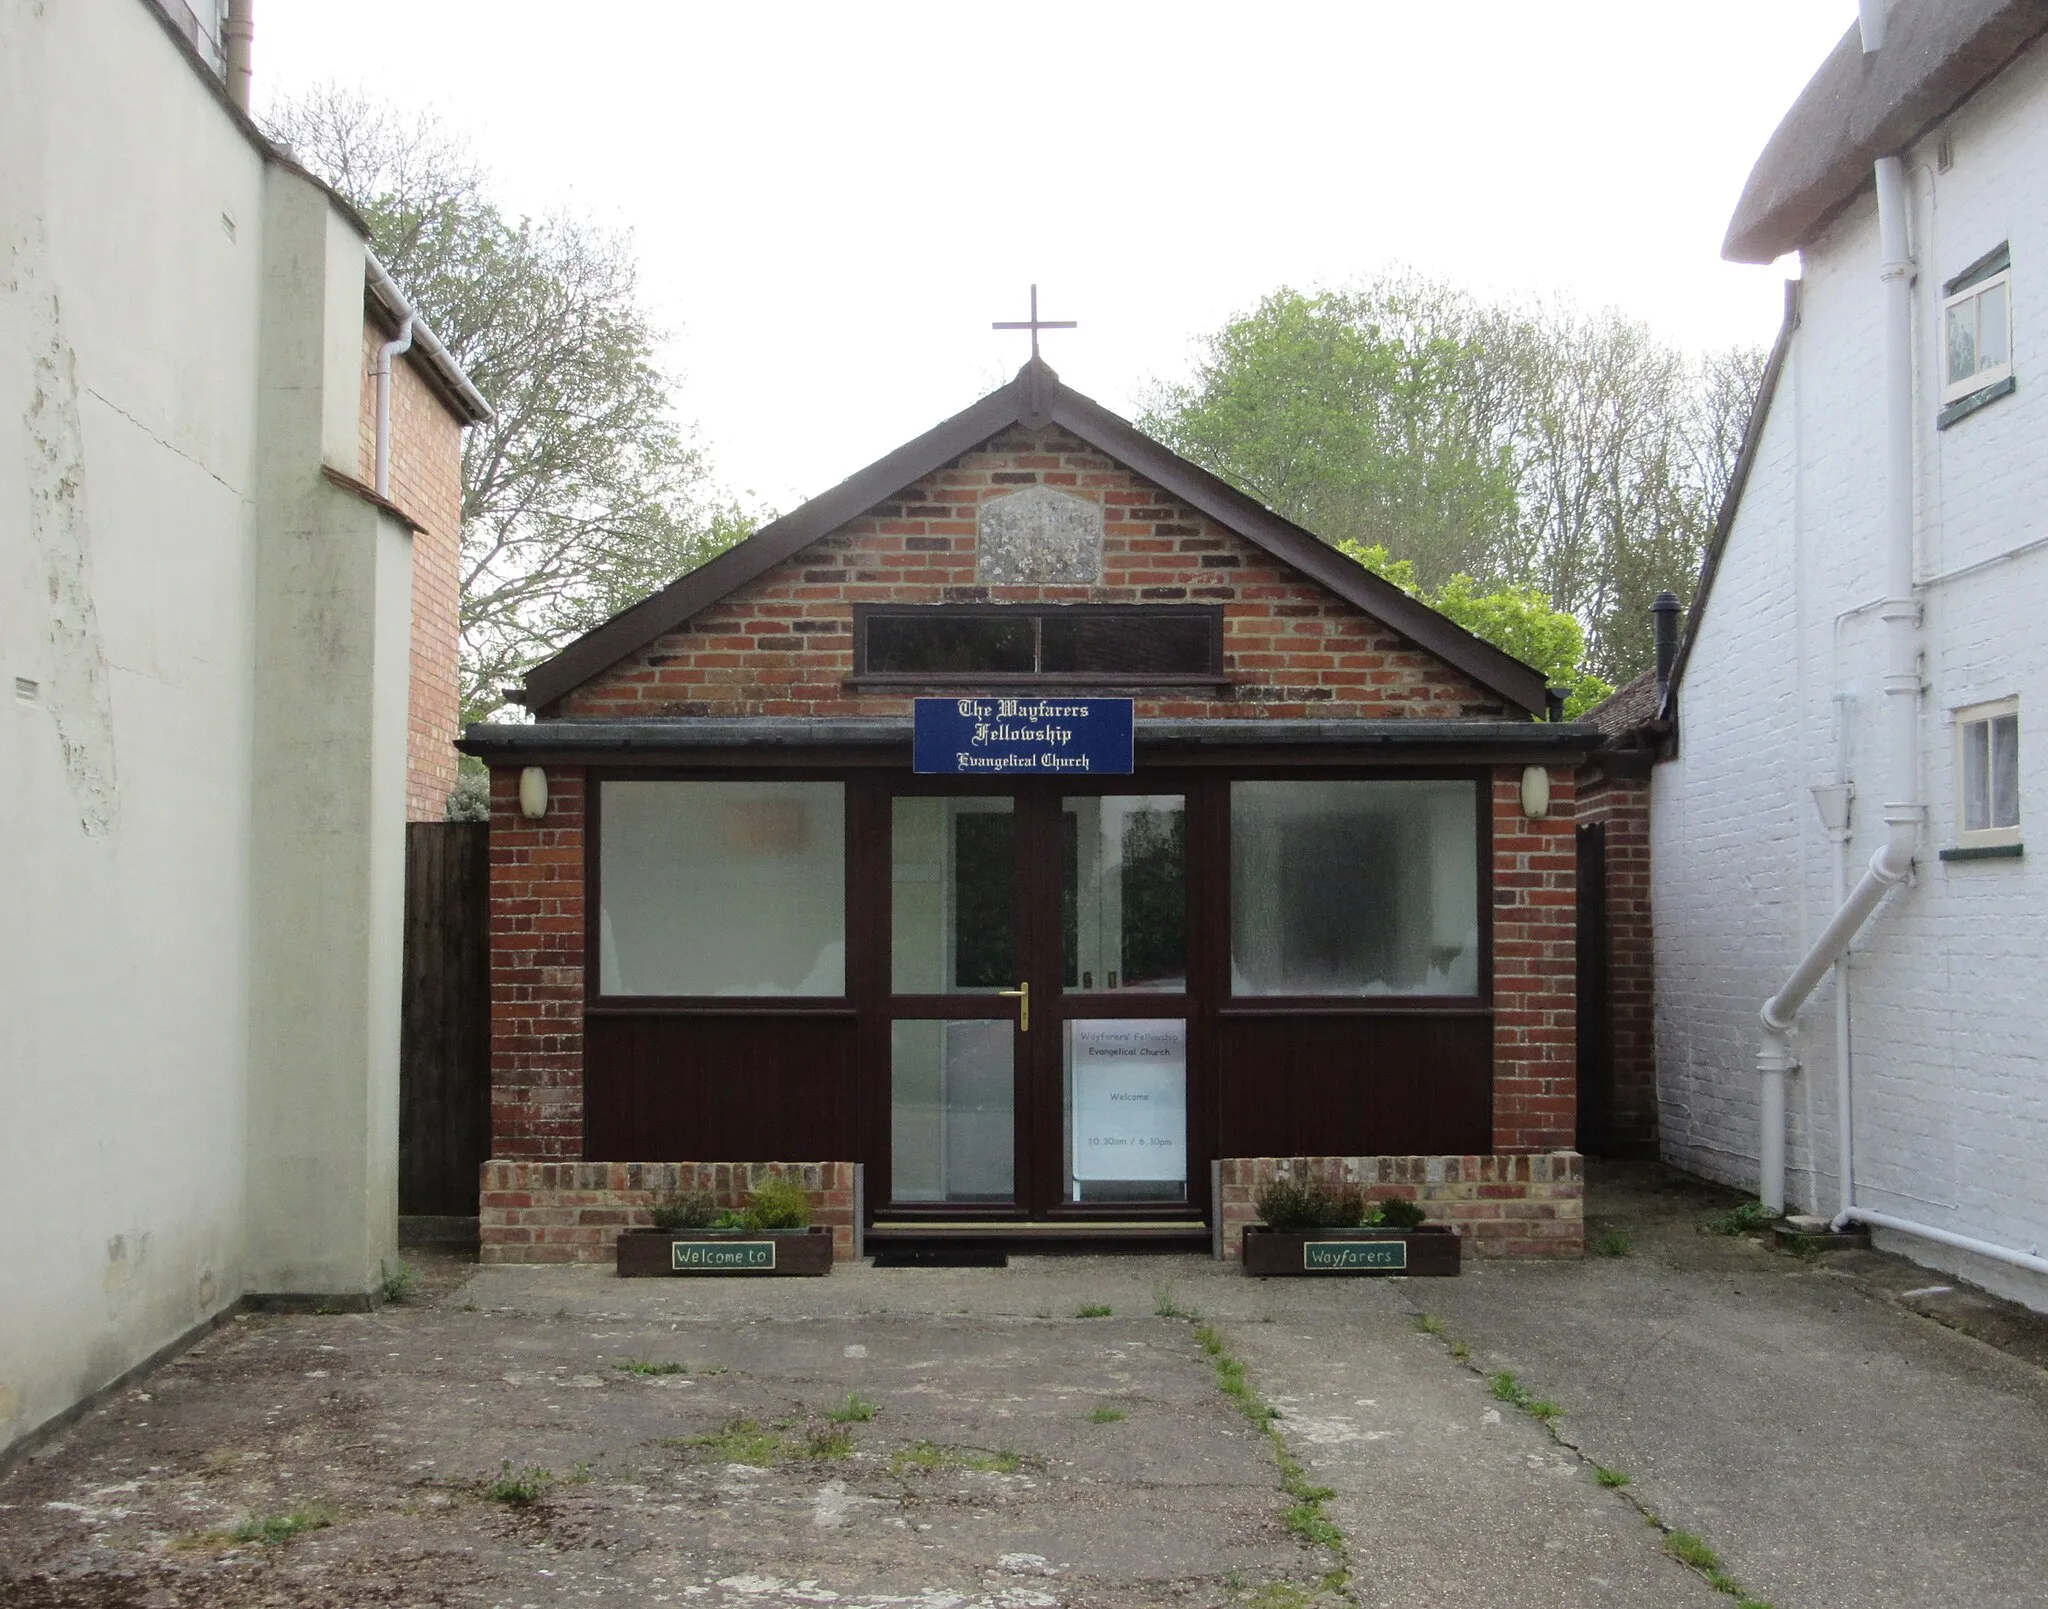 Photo showing: The Wayfarers Fellowship, Castle Street, Carisbrooke, Isle of Wight, England.  A very small Evangelical chapel in Carisbrooke village.  I believe it was registered as a place of worship circa  1975, although the church website states the fellowship was founded in 1936.  A re-set datestone below the gable reads primitive / methodist / chapel 1859, but I can't find any evidence of a Primitive Methodist chapel having stood on this site.